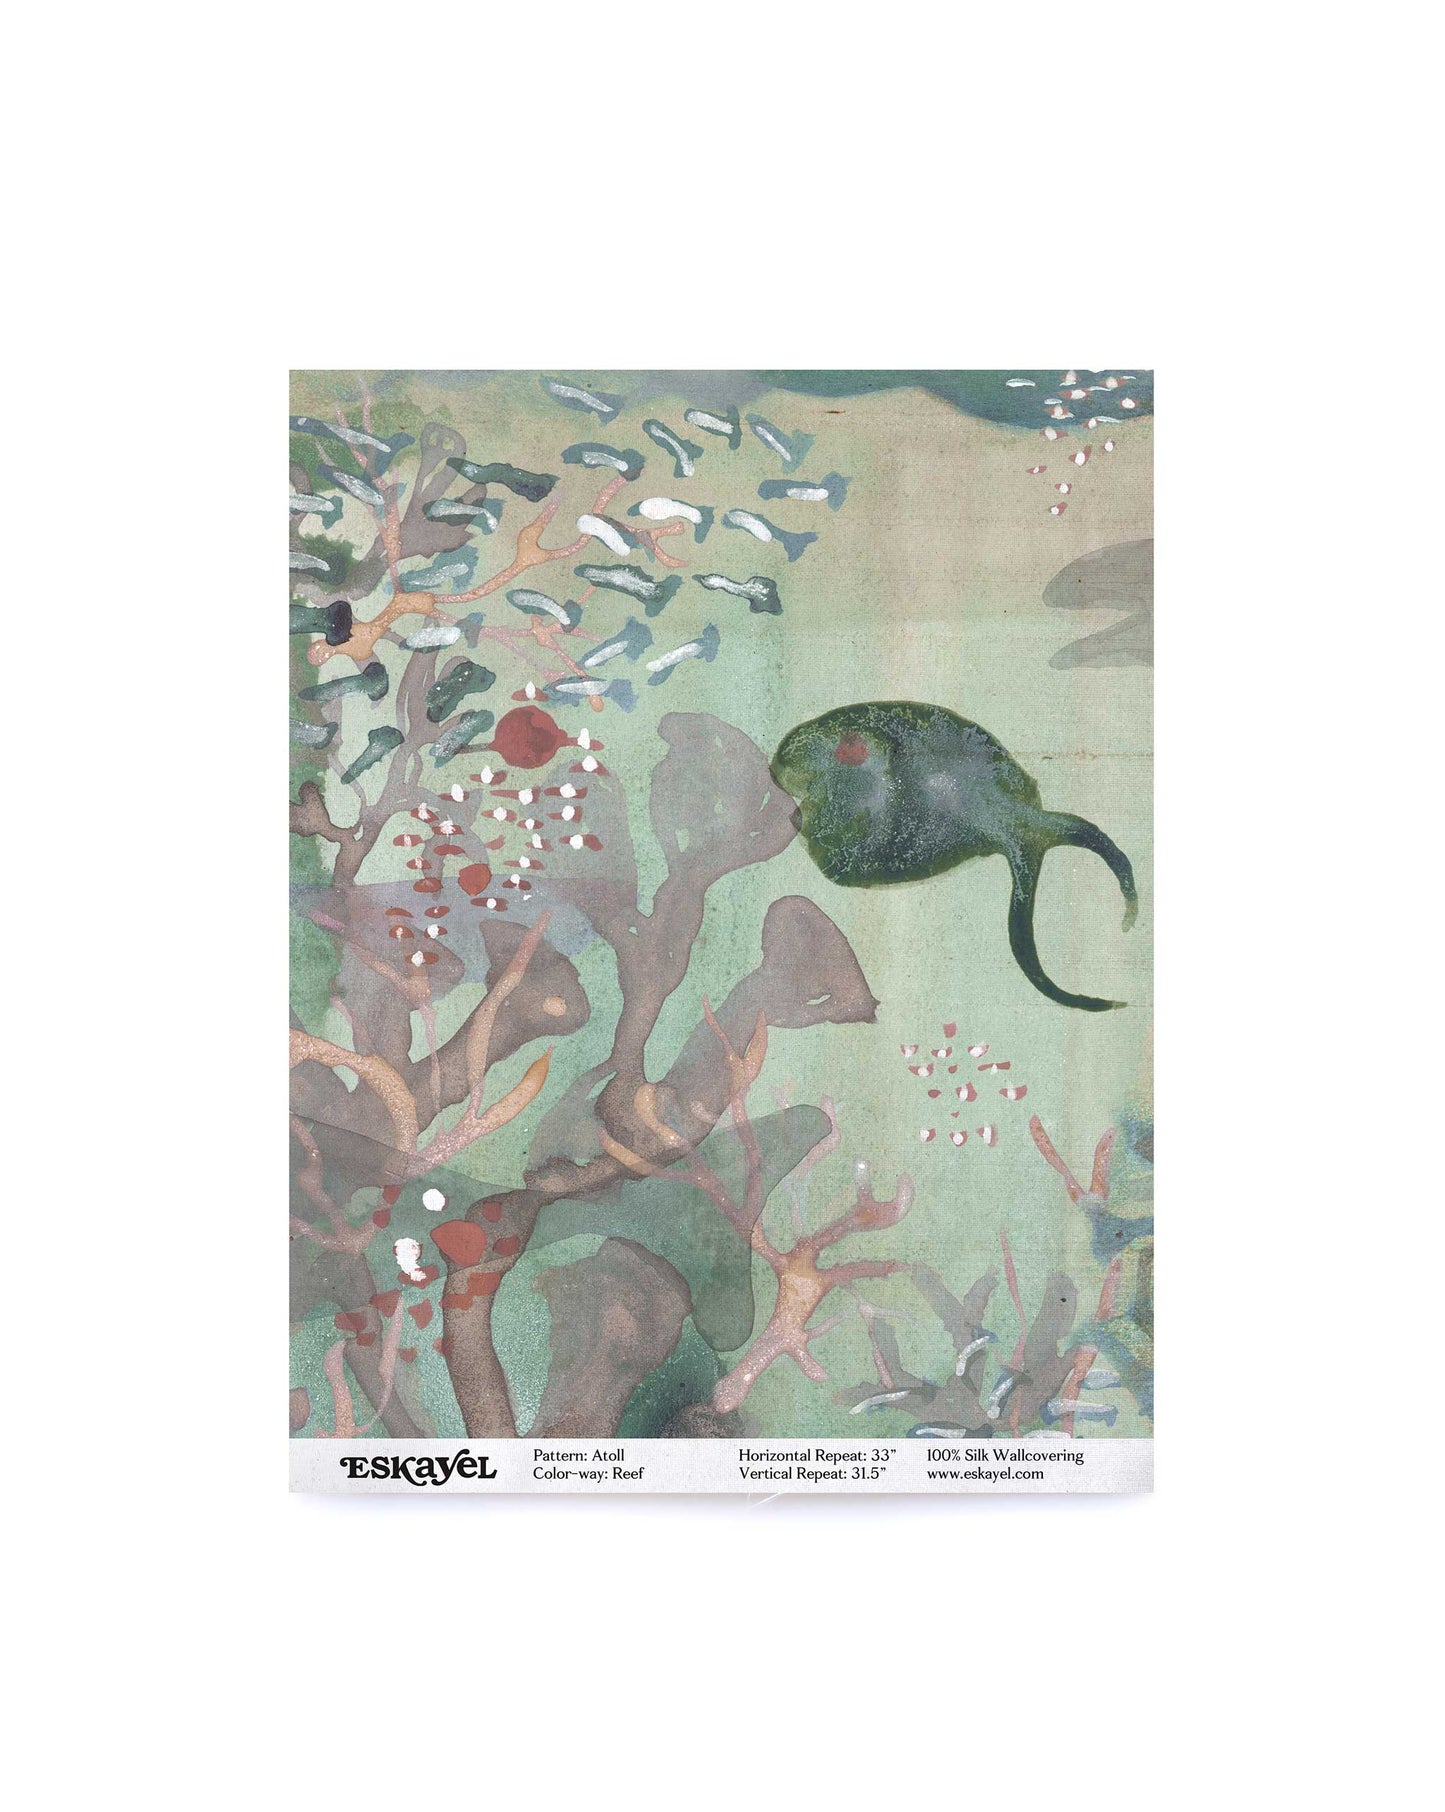 A swatch of Eskayel’s Atoll pattern on paper backed silk wallpaper in the colorway Reef with its green hues.